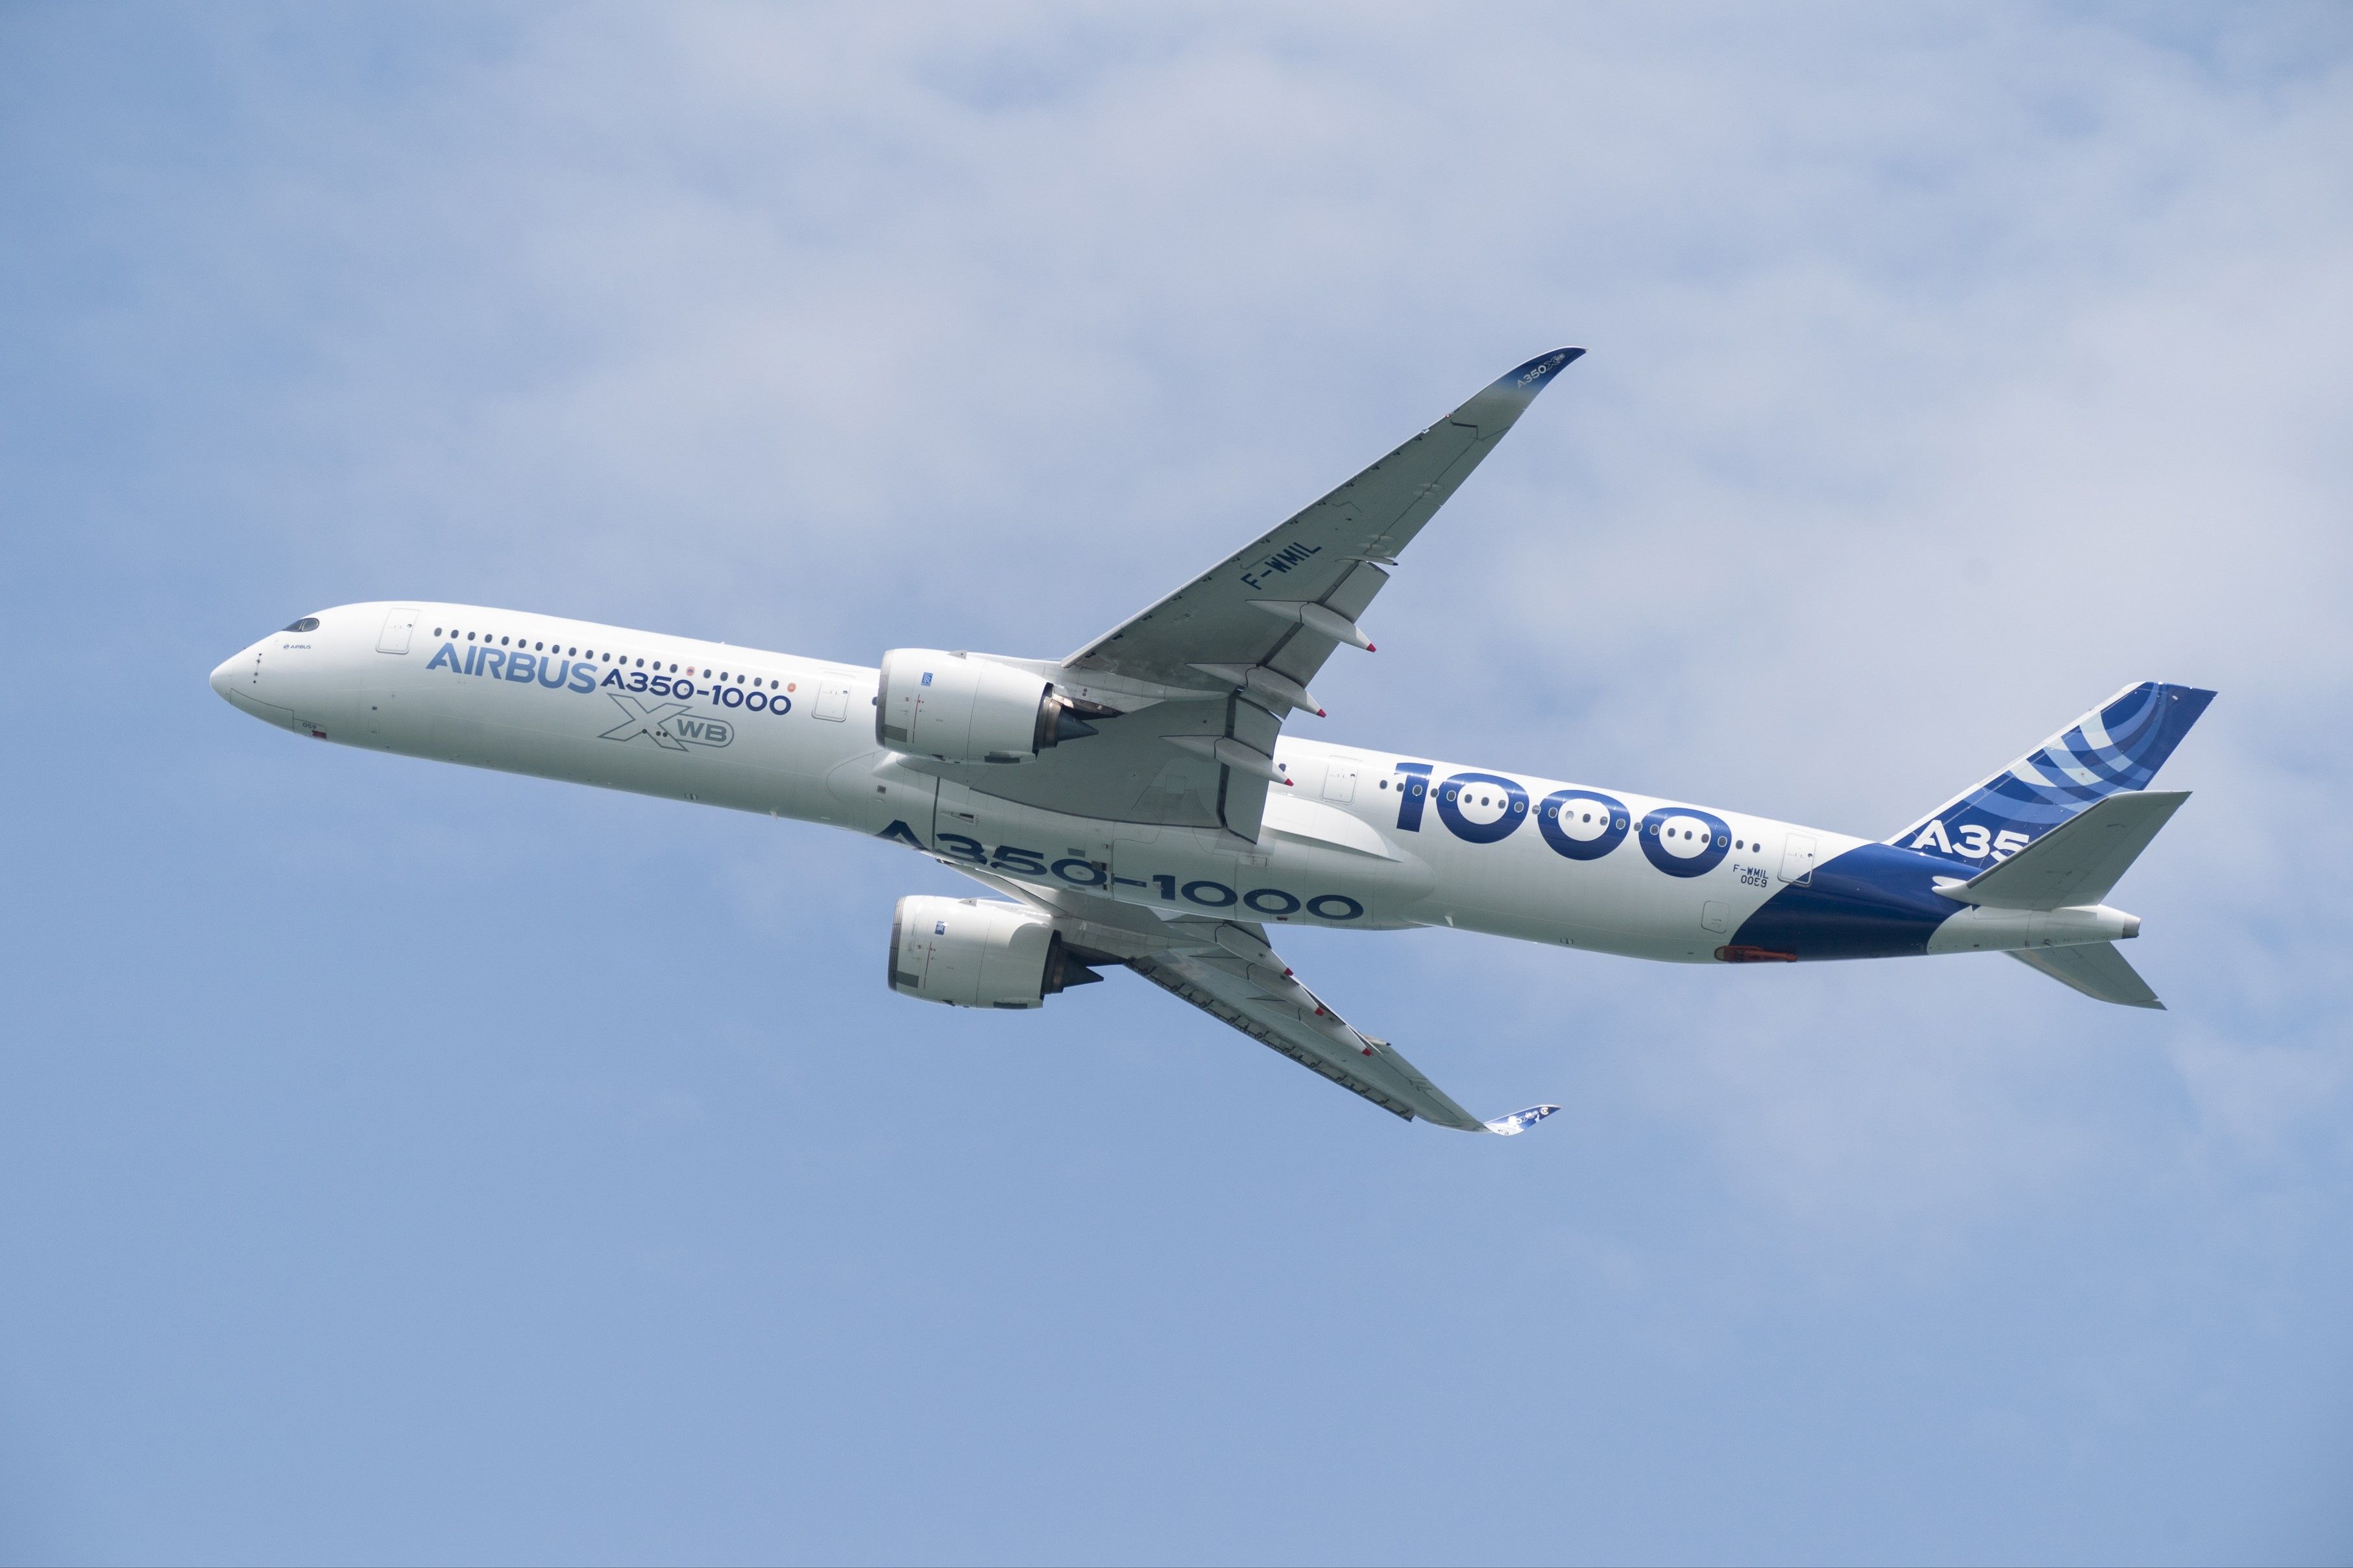 An Airbus A350-1000 in house livery flying in the sky.